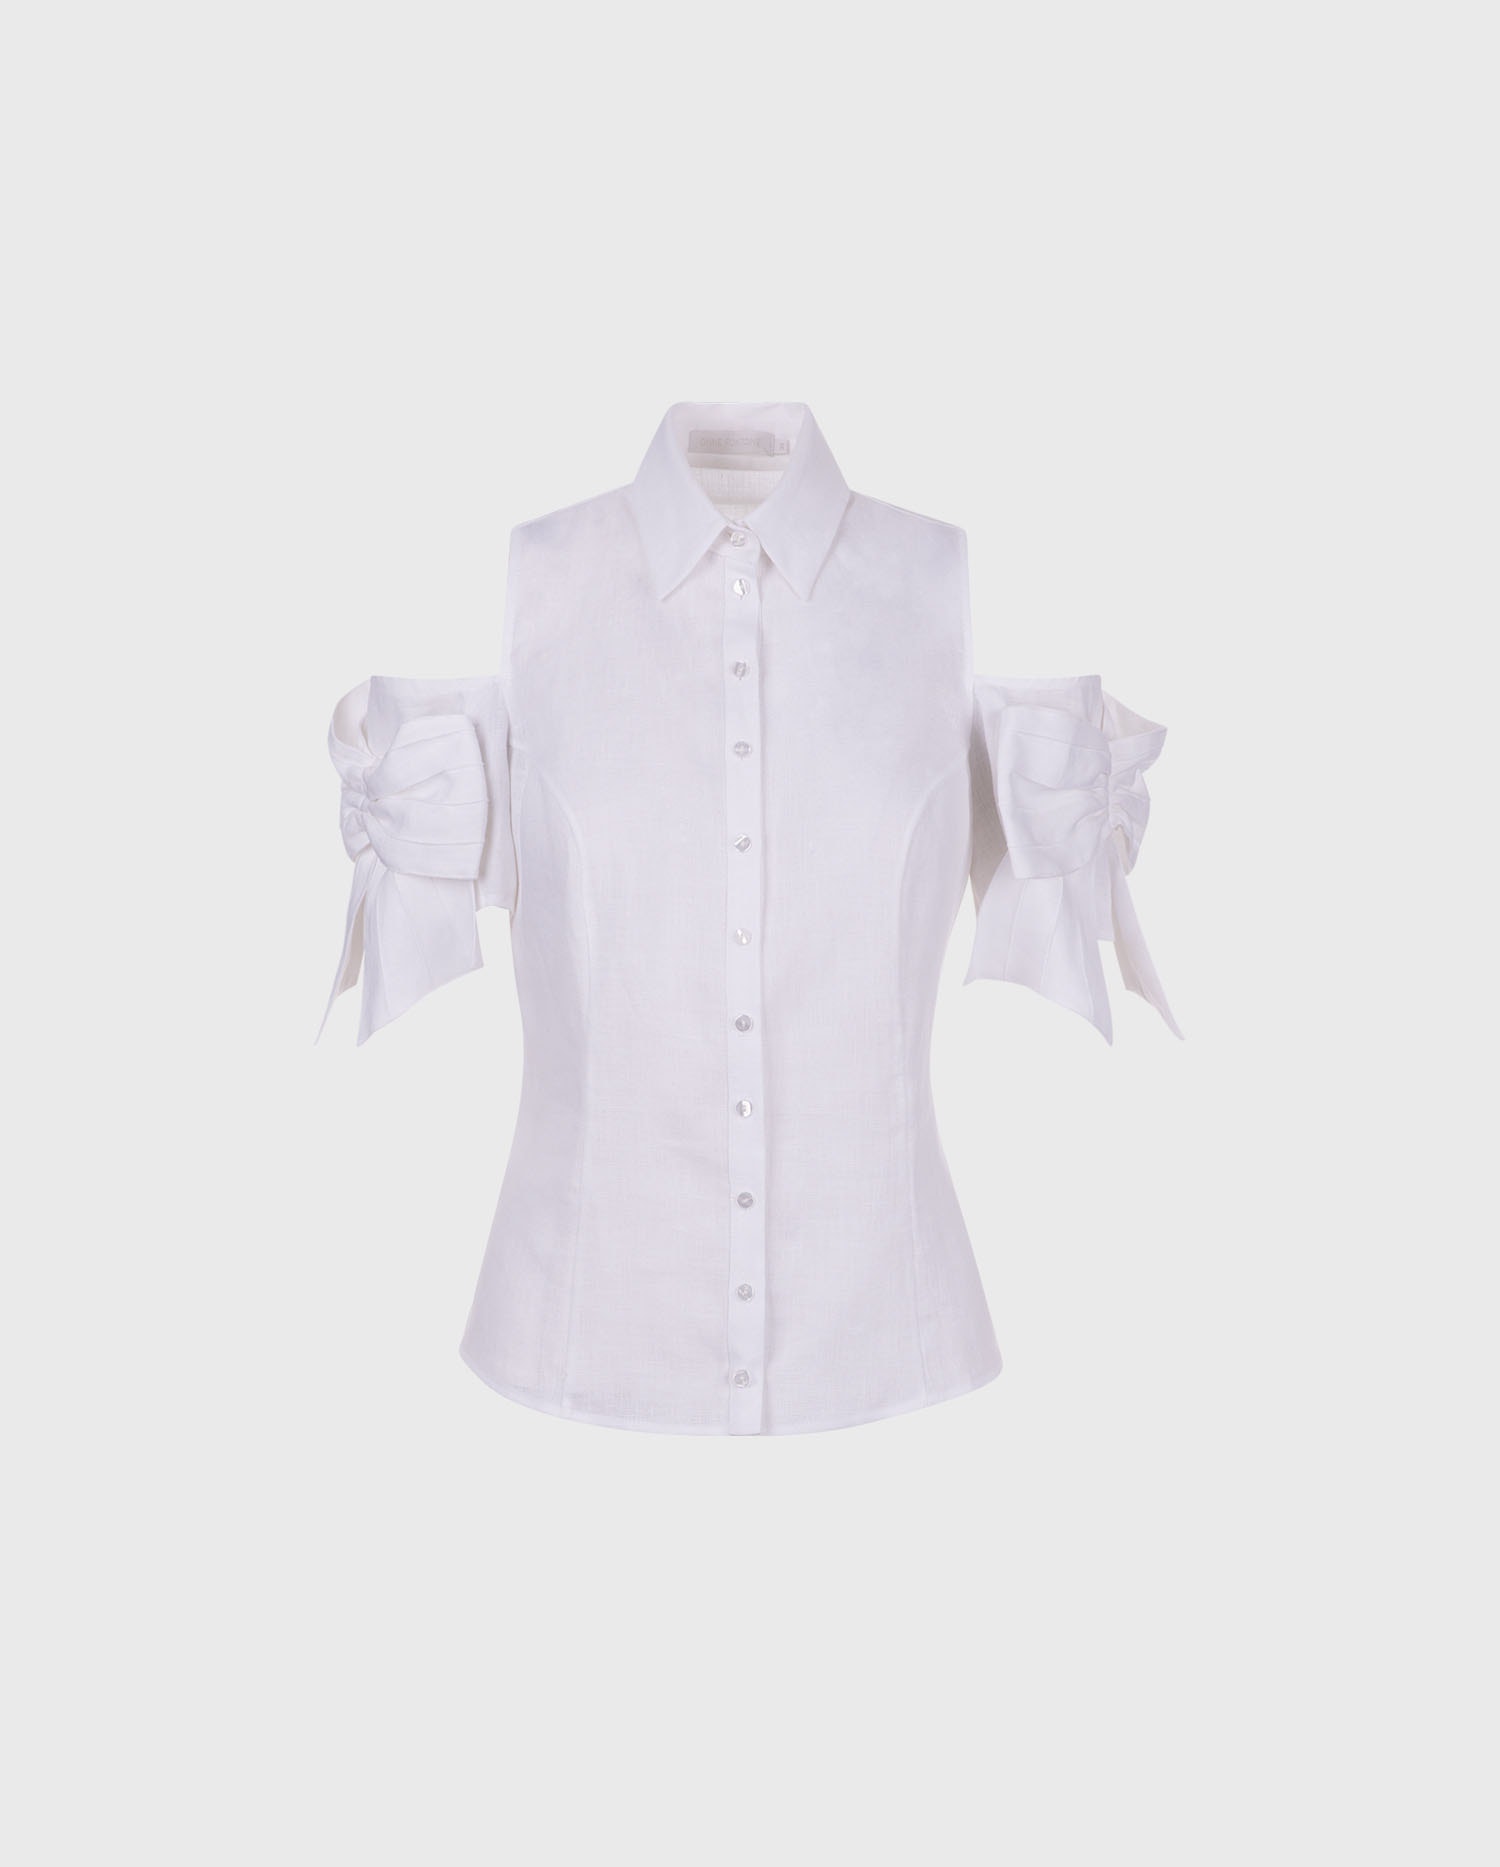 Explore the CALLA fitted white linen button down shirt with cold shoulder and intricate bows sleeves from ANNE FONTAINE